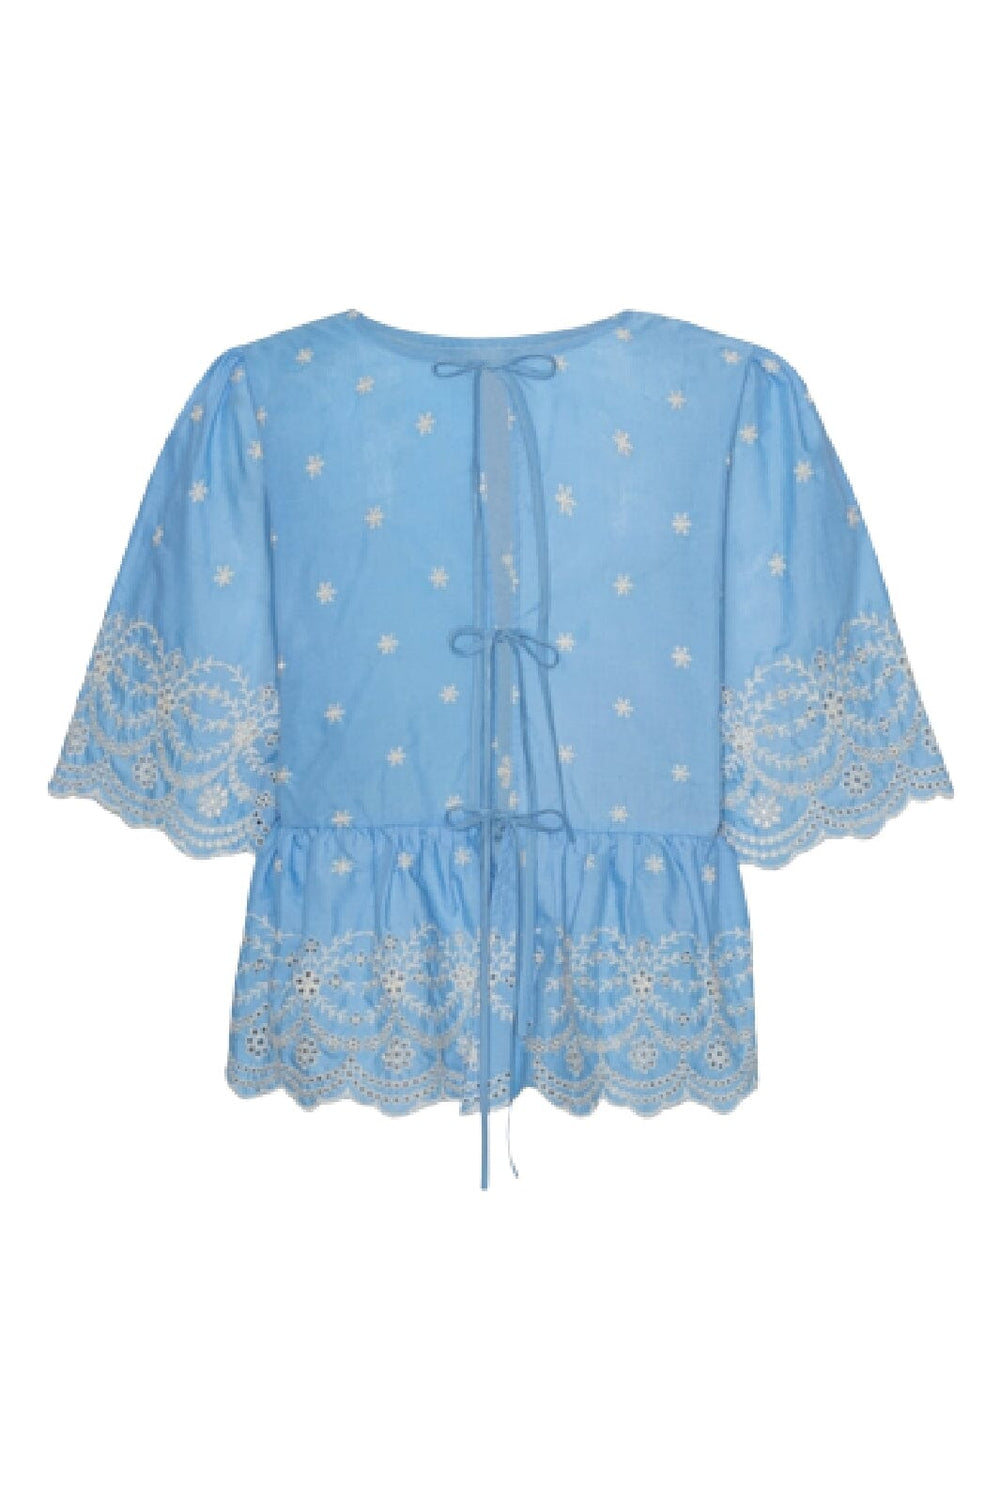 Forudbestilling - BYIC - Lula Top - sbwe Soft Blue White Embroidery Toppe 